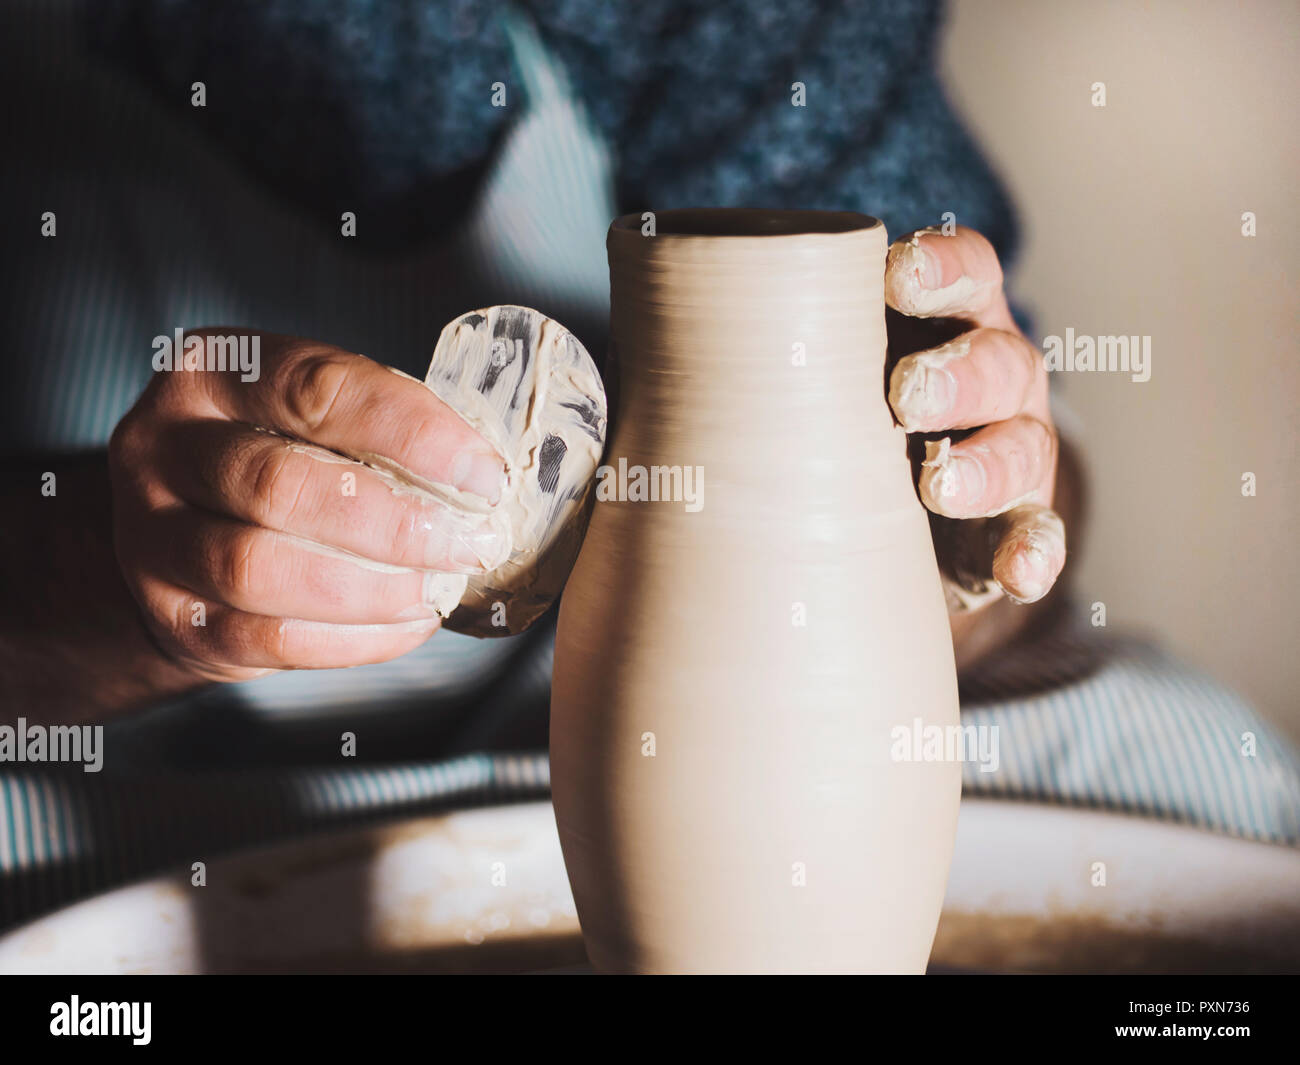 Unidentified Potter Making Clay Water Pots on Pottery Wheel. Editorial  Photography - Image of ceramic, handmade: 122139977